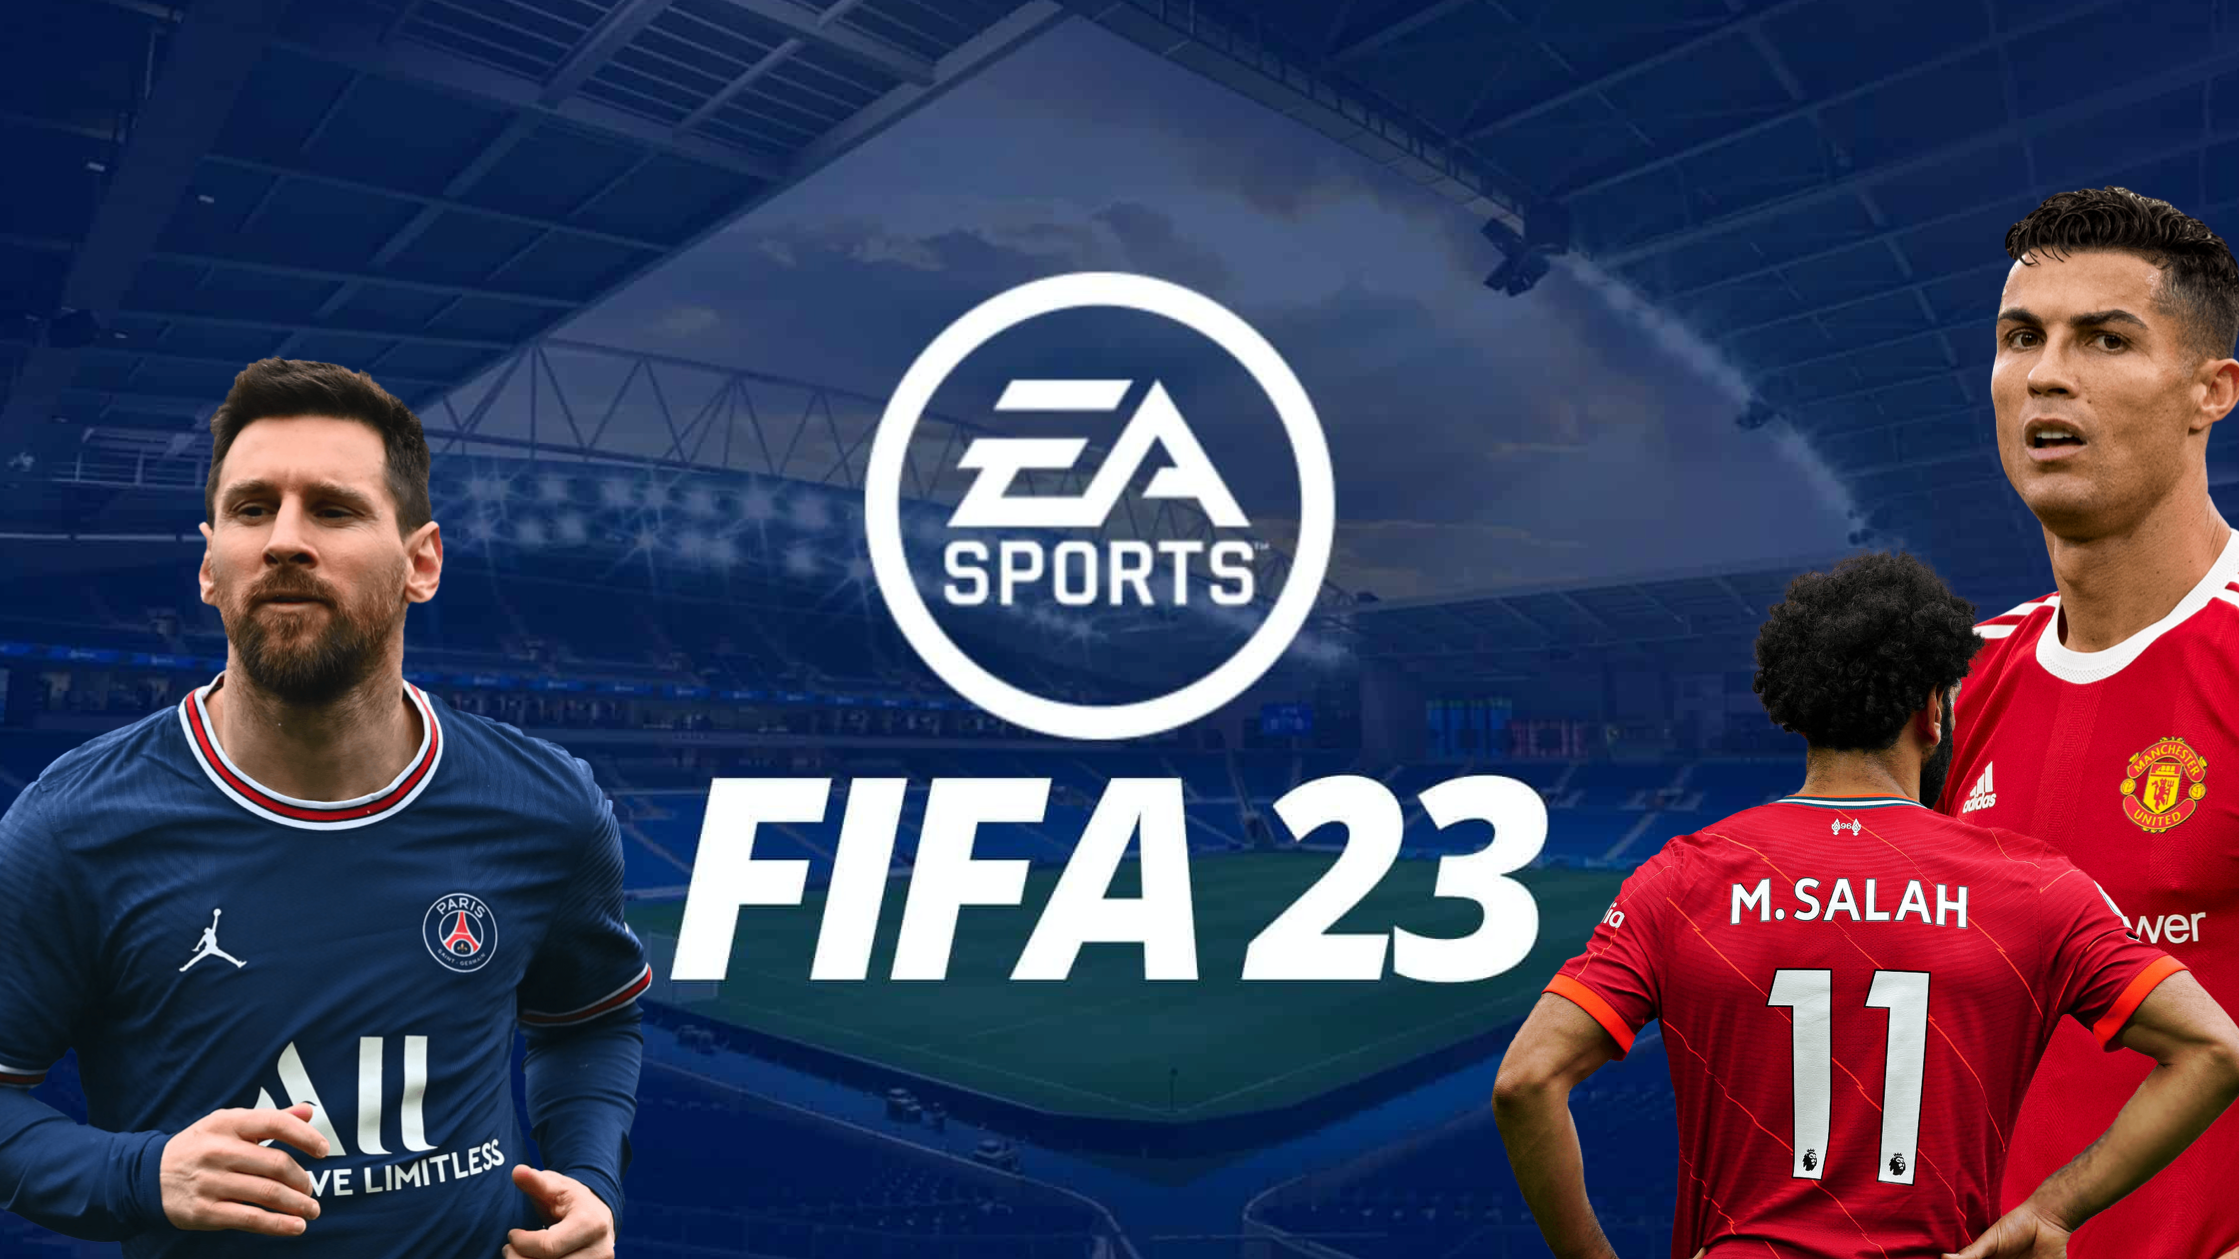 Fans Are Voting For The FIFA 23 Cover Star Ahead Of Launch